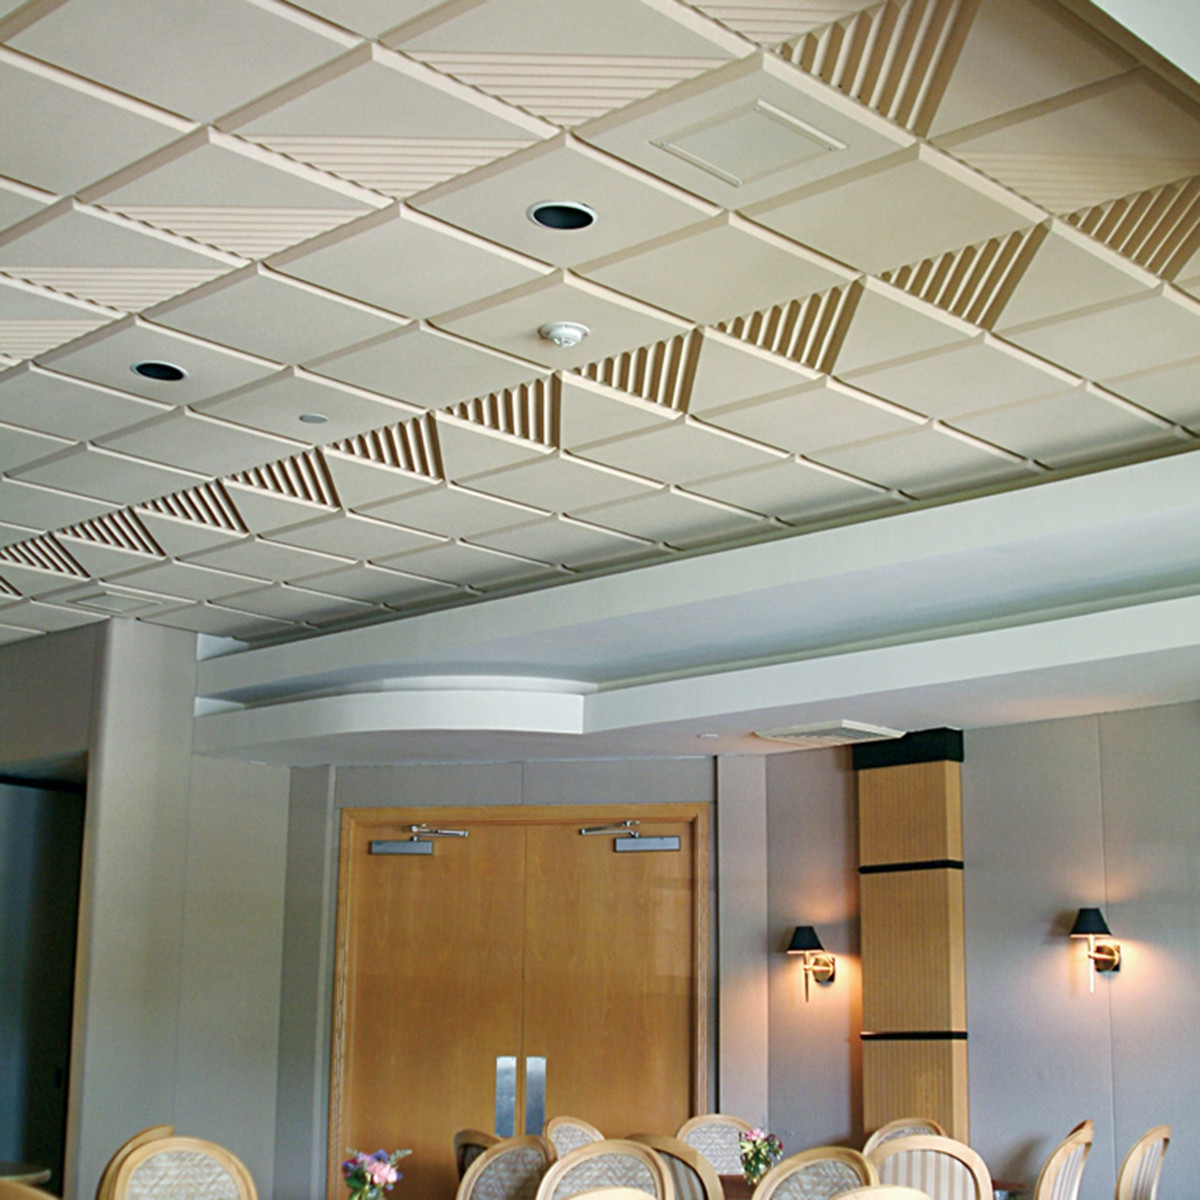 Acoustical Ceiling Tiles For Soundproofingcan acoustical ceiling tile be painted sound proof acoustical